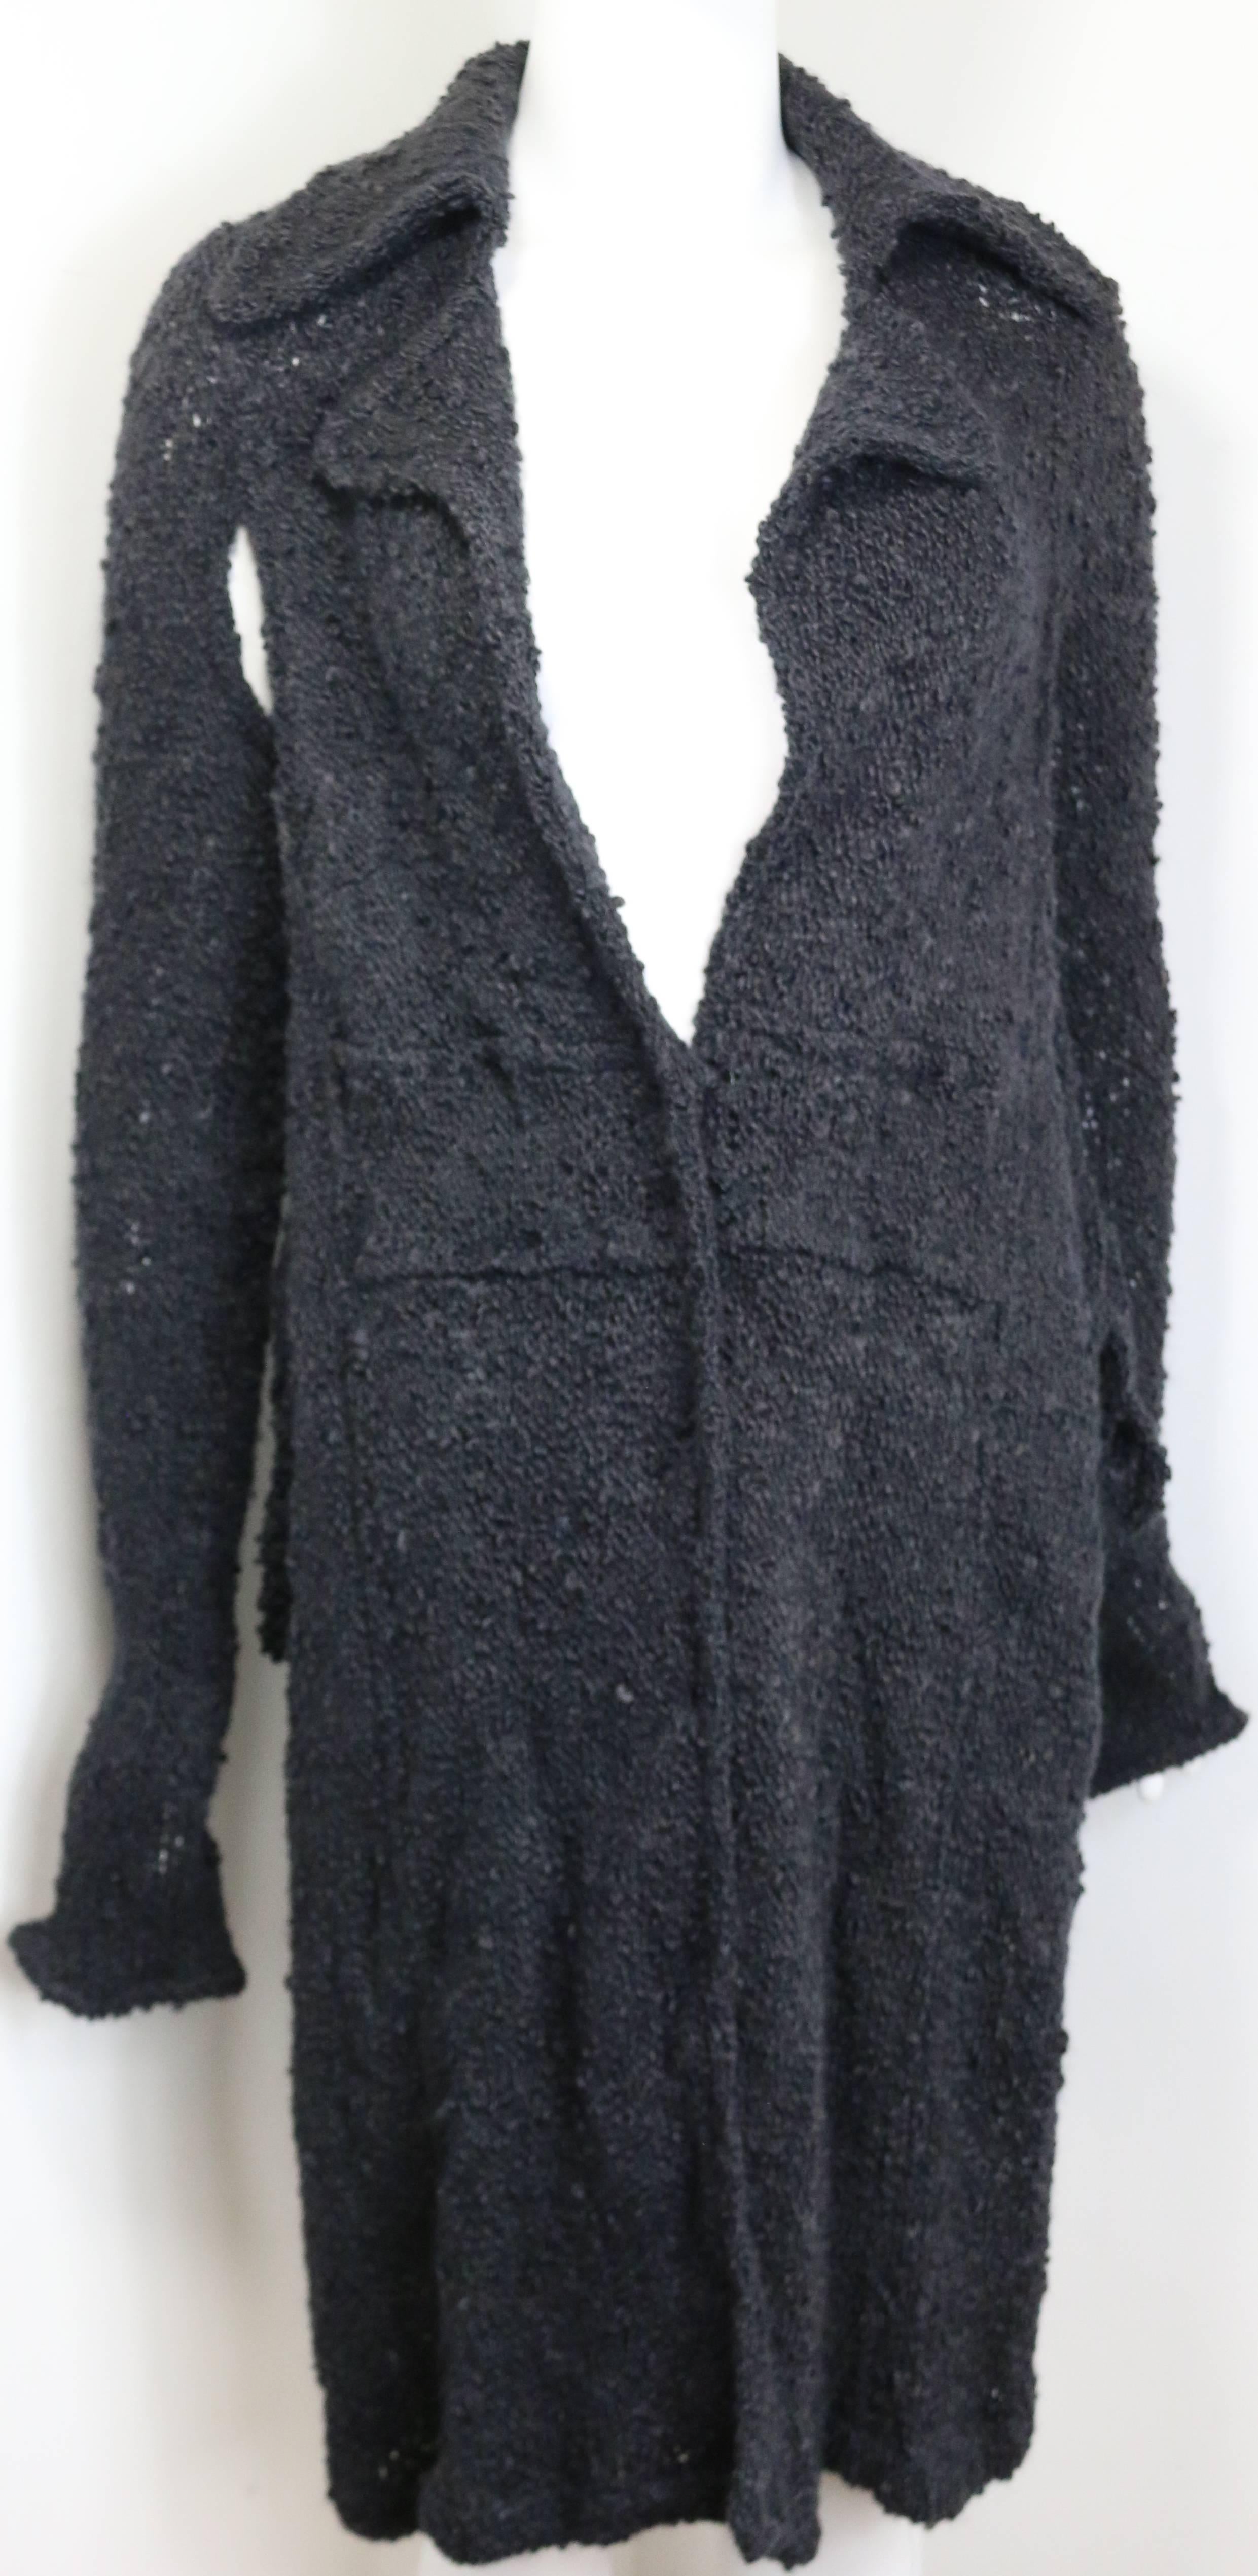 - Vintage 90s Costume National grey cashmere long knitted cardigan with both sides split cut.  You can wear something underneath and treat it like a dress as well. Stylish and still very modern knitted cardigan to wear now!

- Featuring five